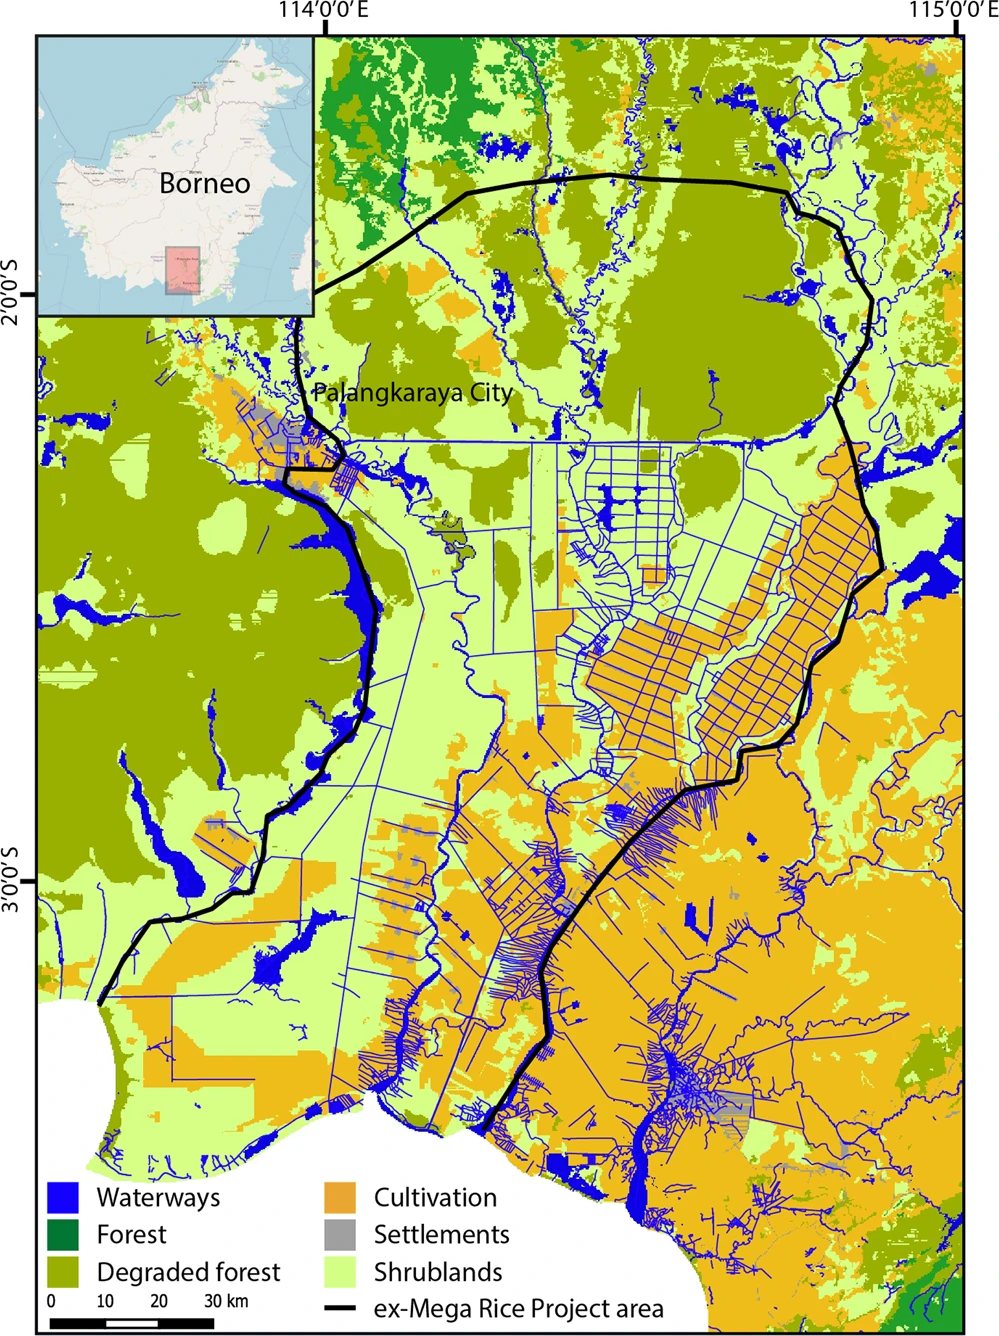 Study area map. Land cover map showing the whole study area (edge of map) circa 2015 as well as the ex-Mega Rice Project (EMRP) area (black outline). Inset map of Borneo provided by OpenStreetMap.